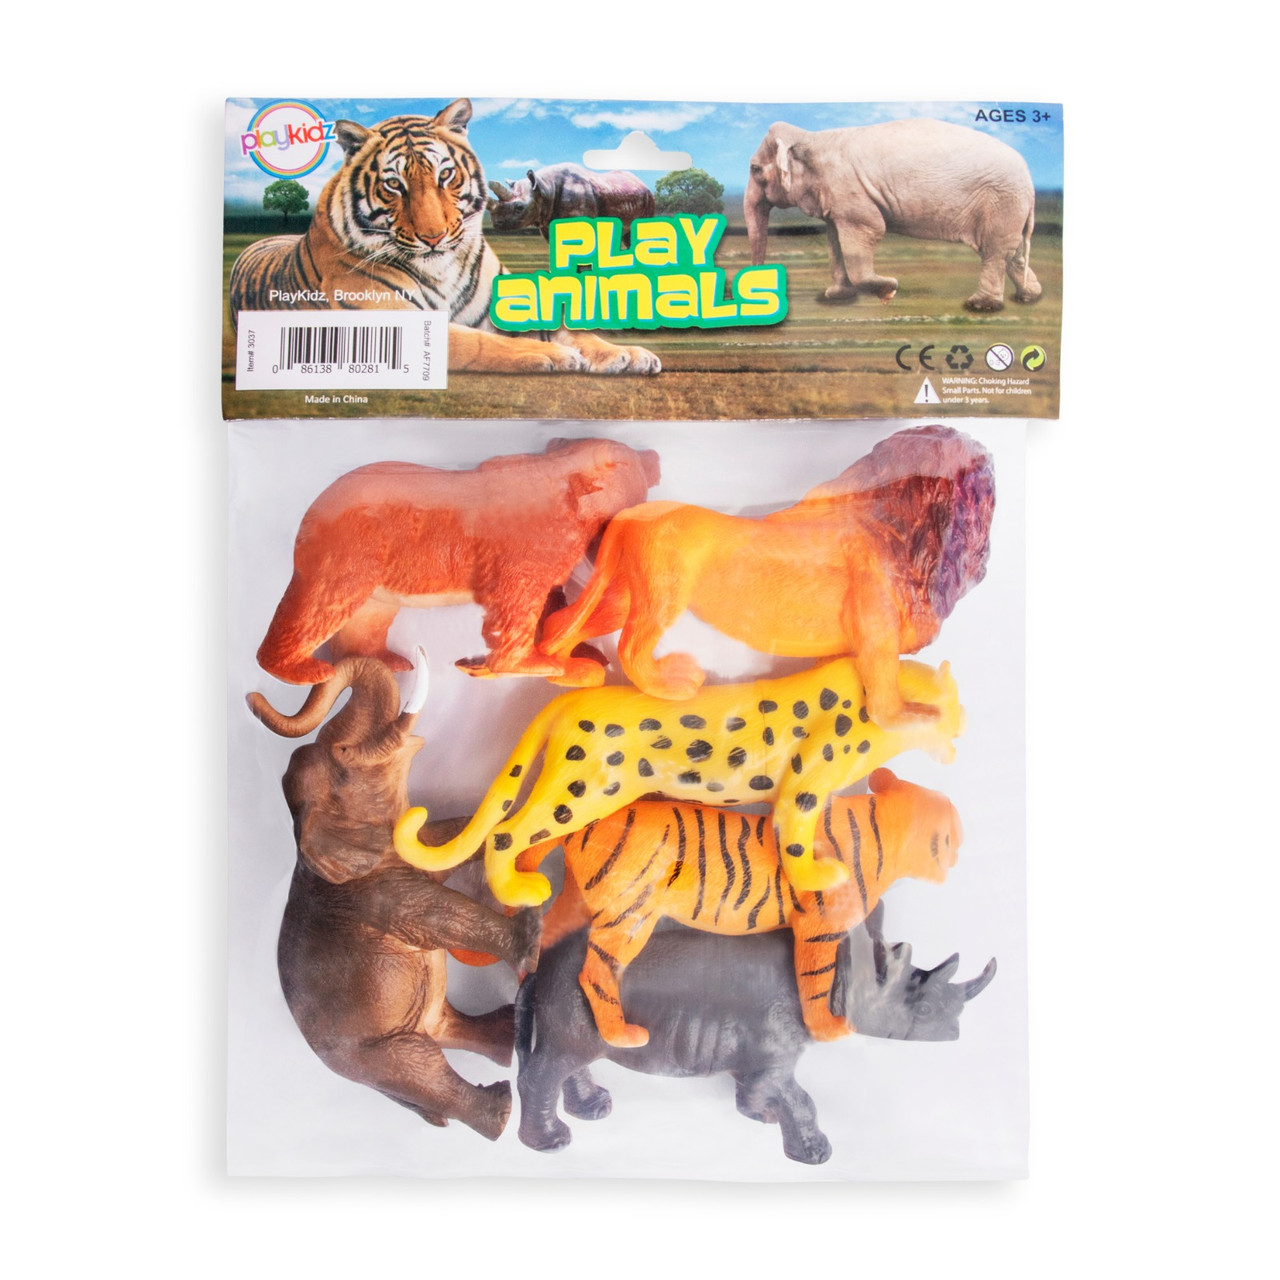 jungle animal toys for toddlers